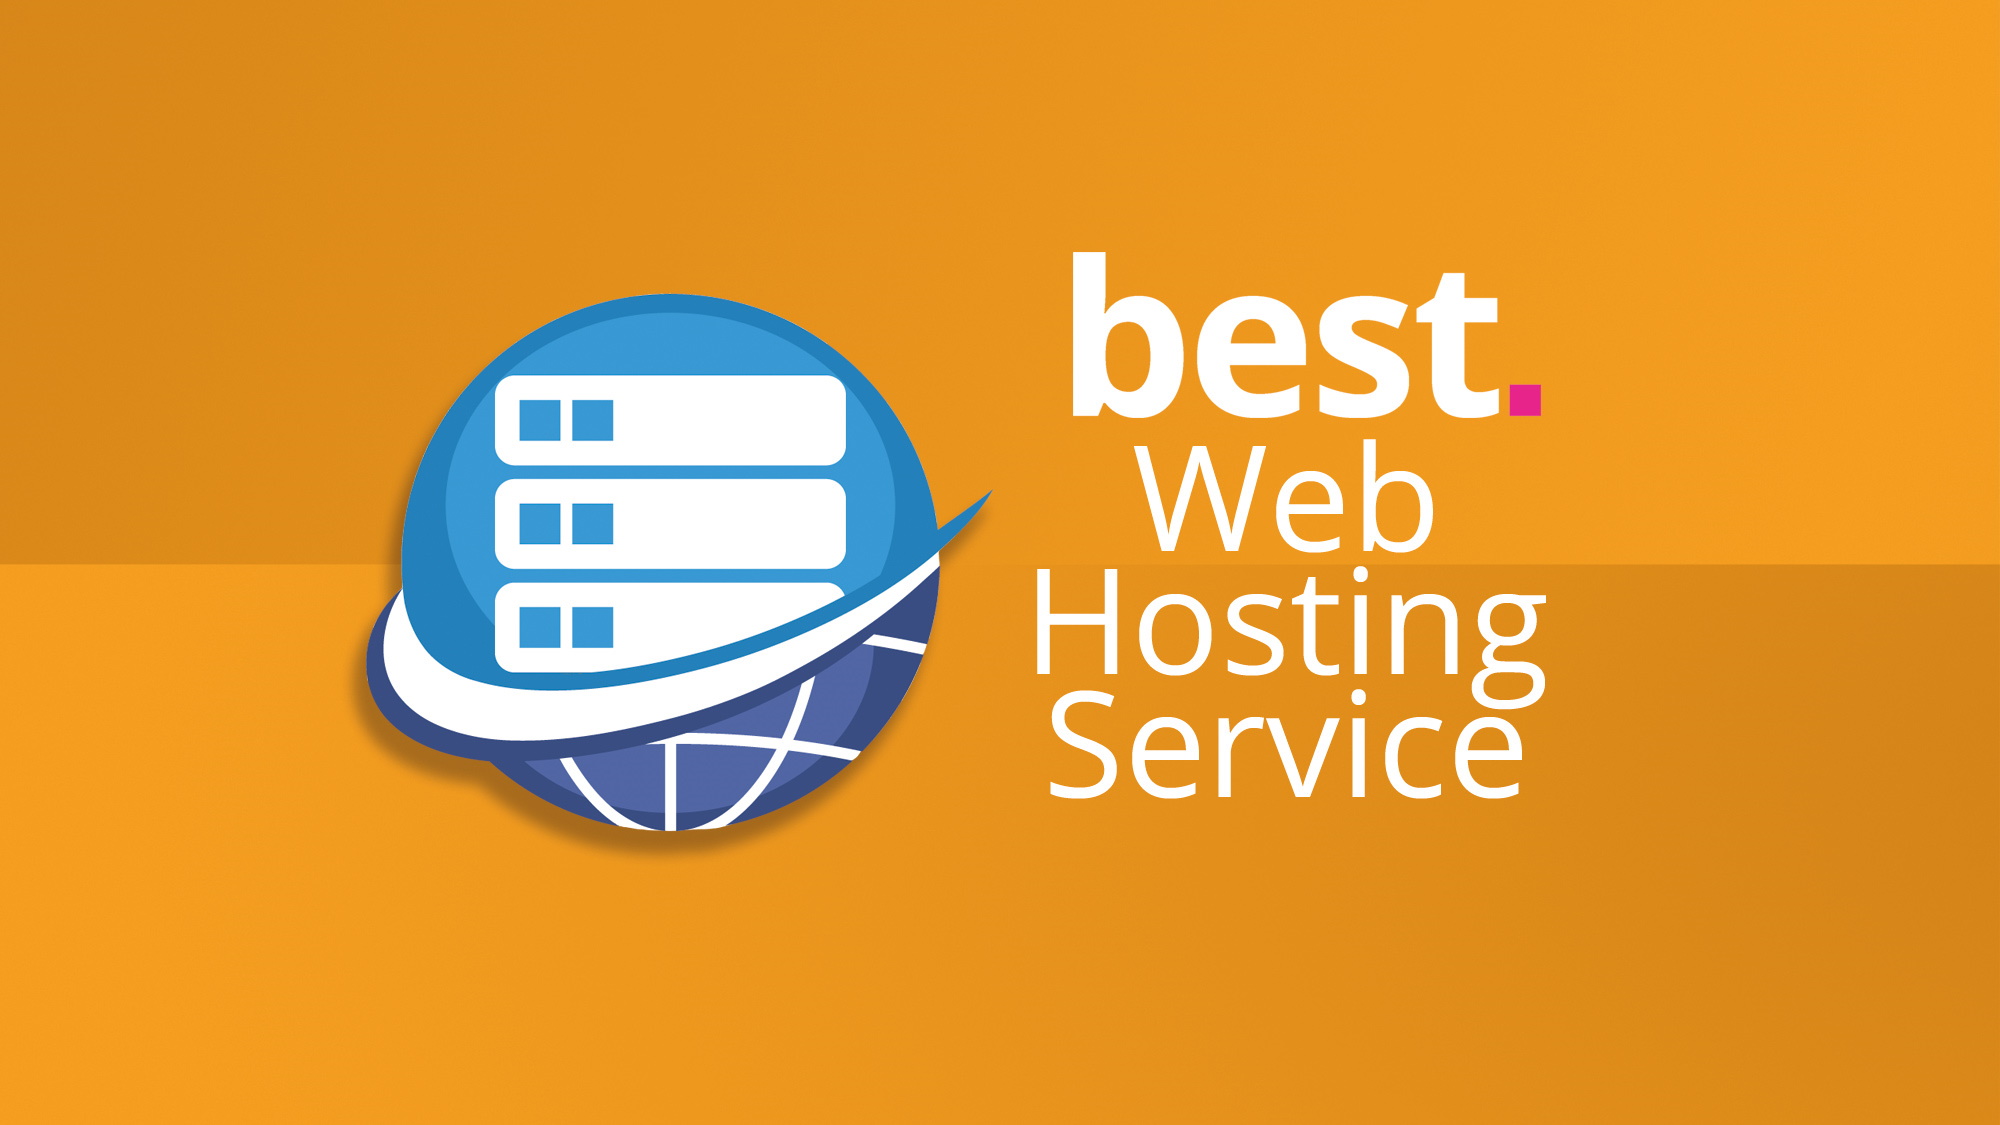 Personal Web Hosting Features